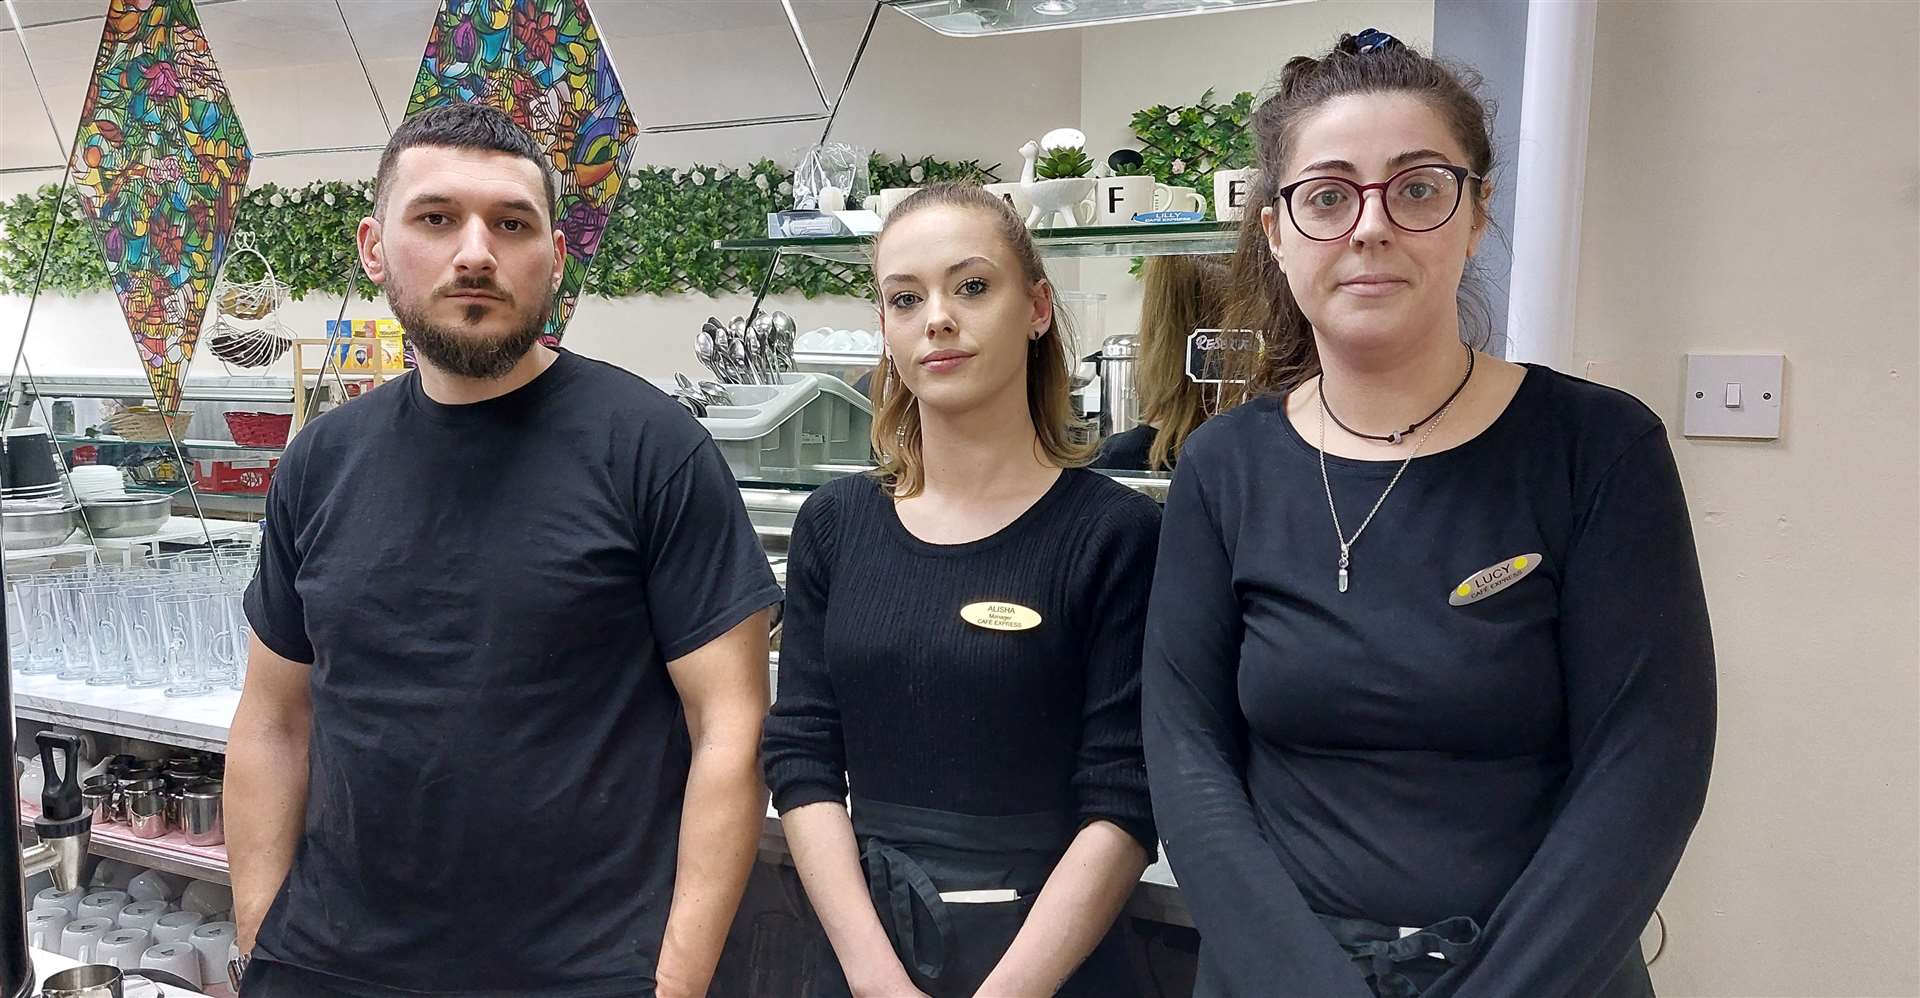 Staff at Cafe Express in Ashford's Lower High Street say crime is a real problem. Pictured owner Ali Sasmaz, manager Alisha Dighton, and worker Lucy Wakley